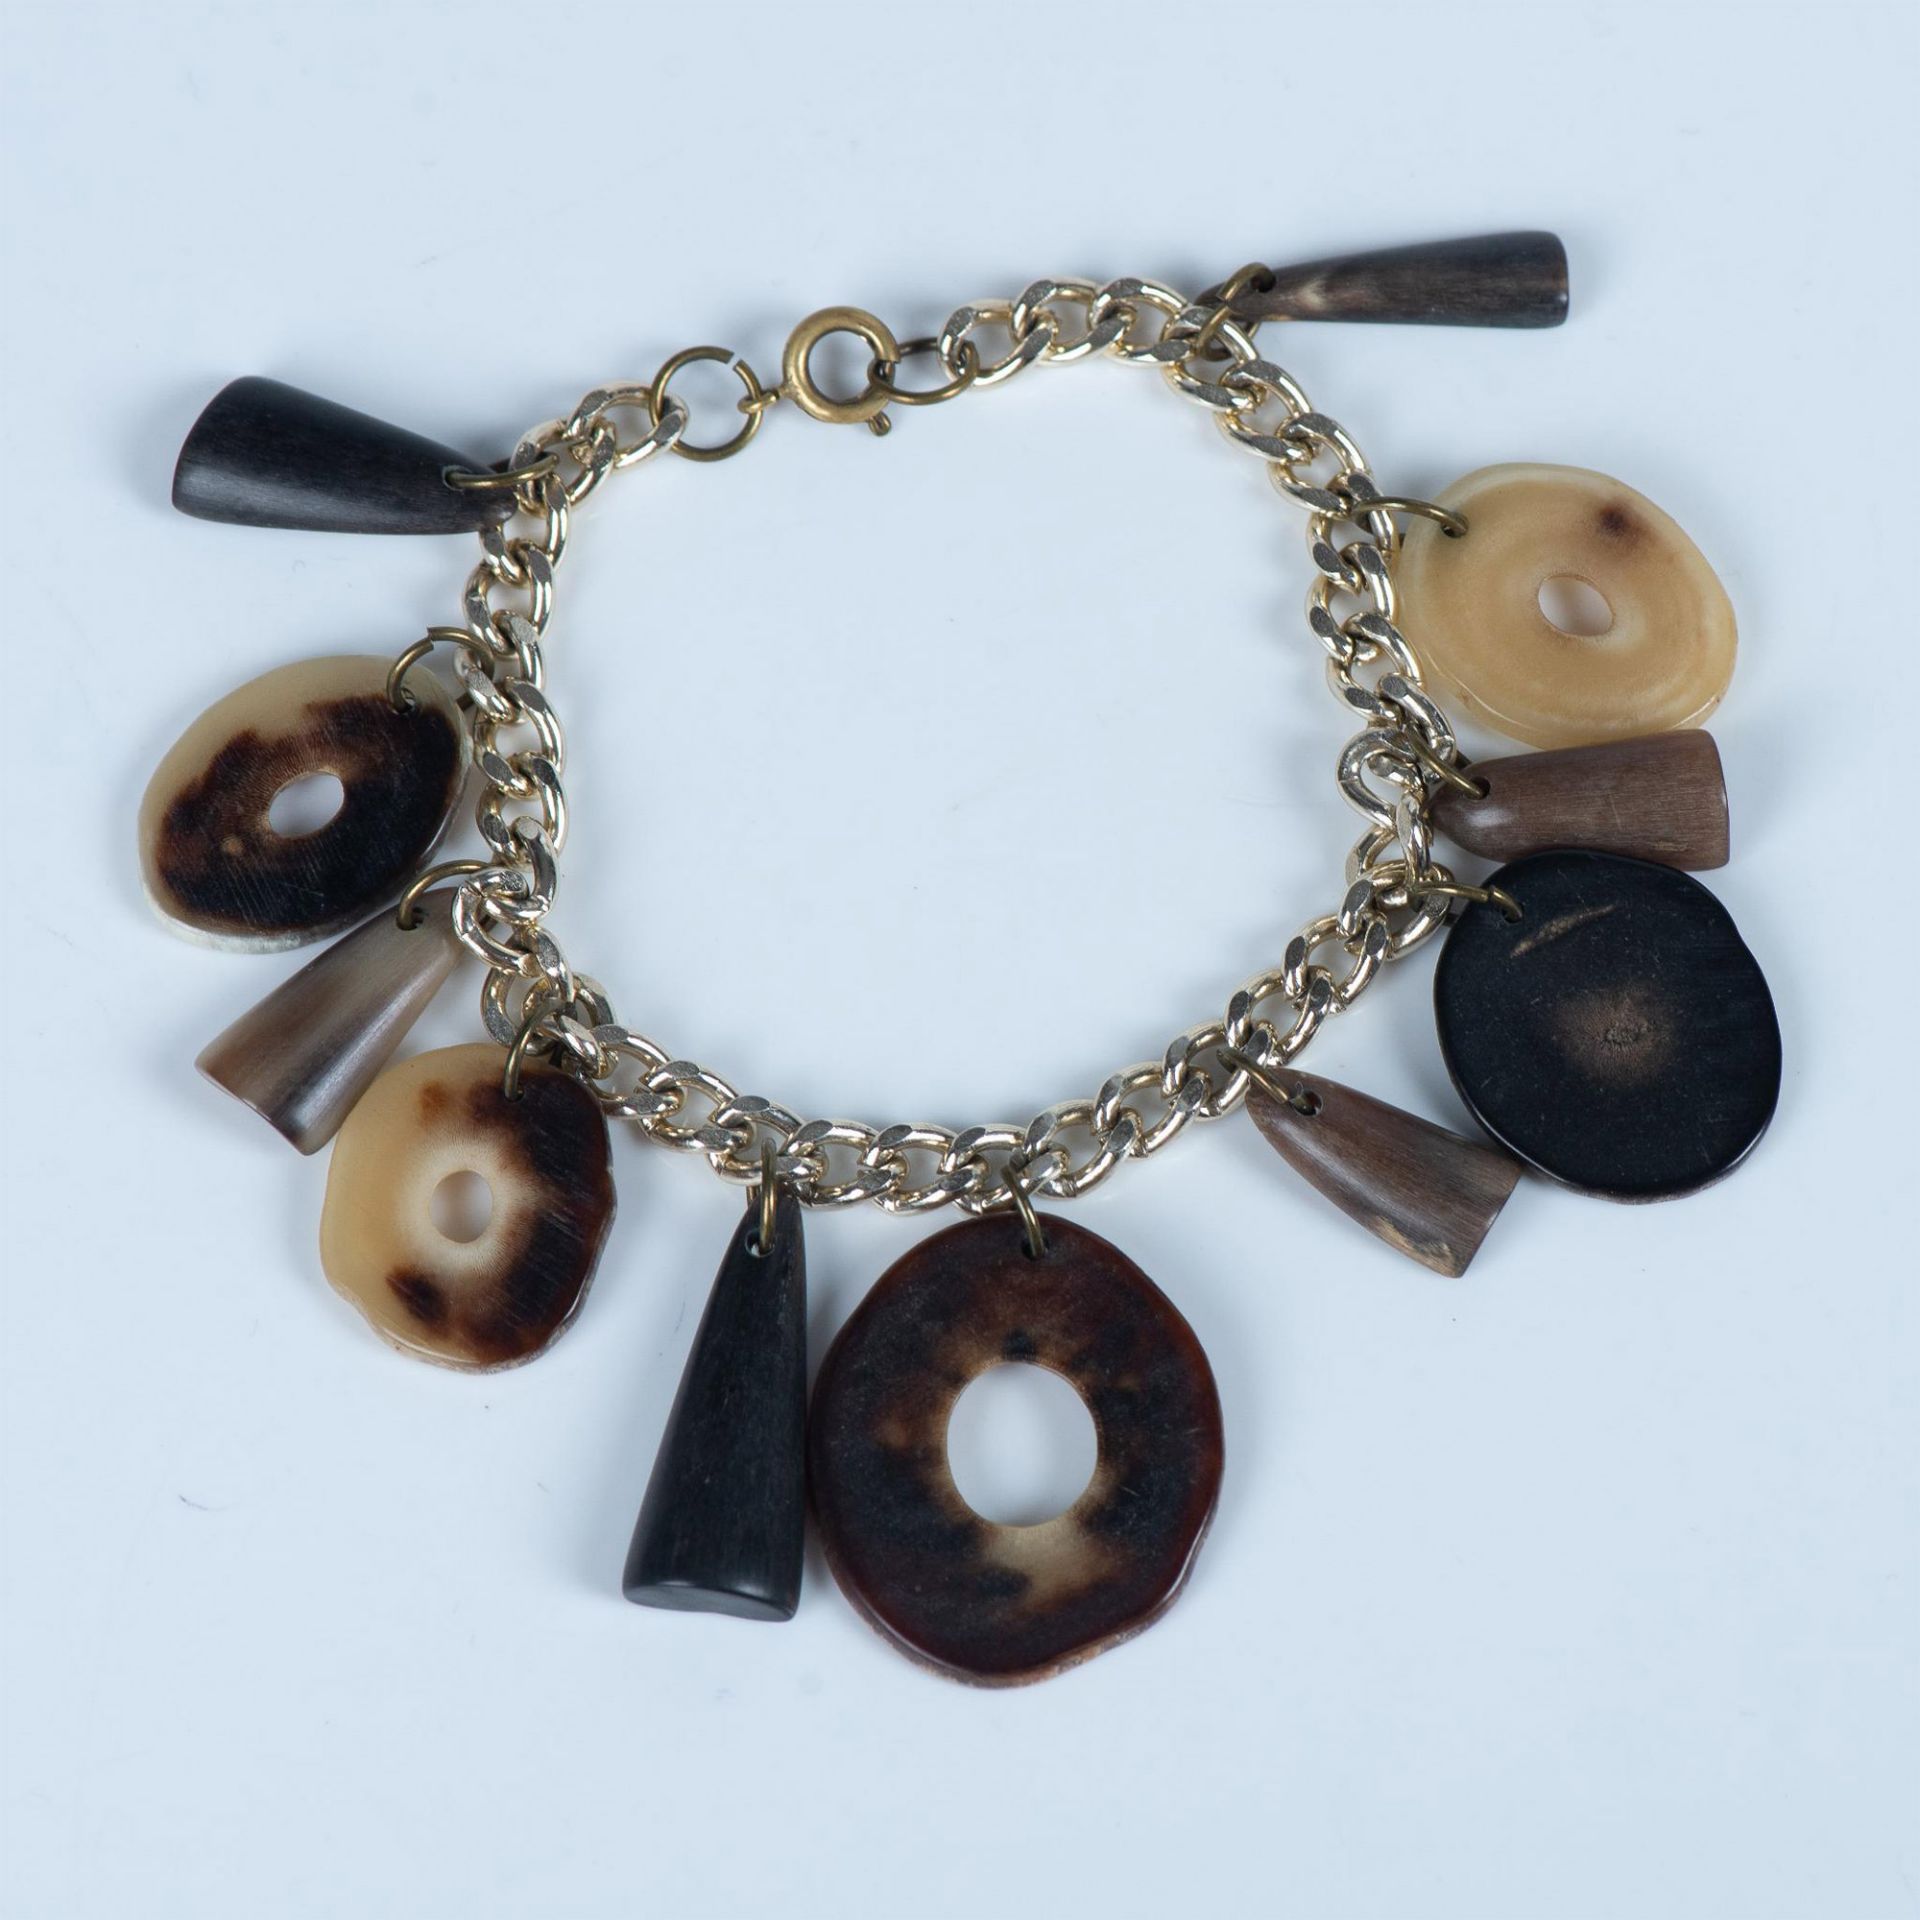 2pc Horn and Shell Necklace and Bracelet - Image 5 of 6